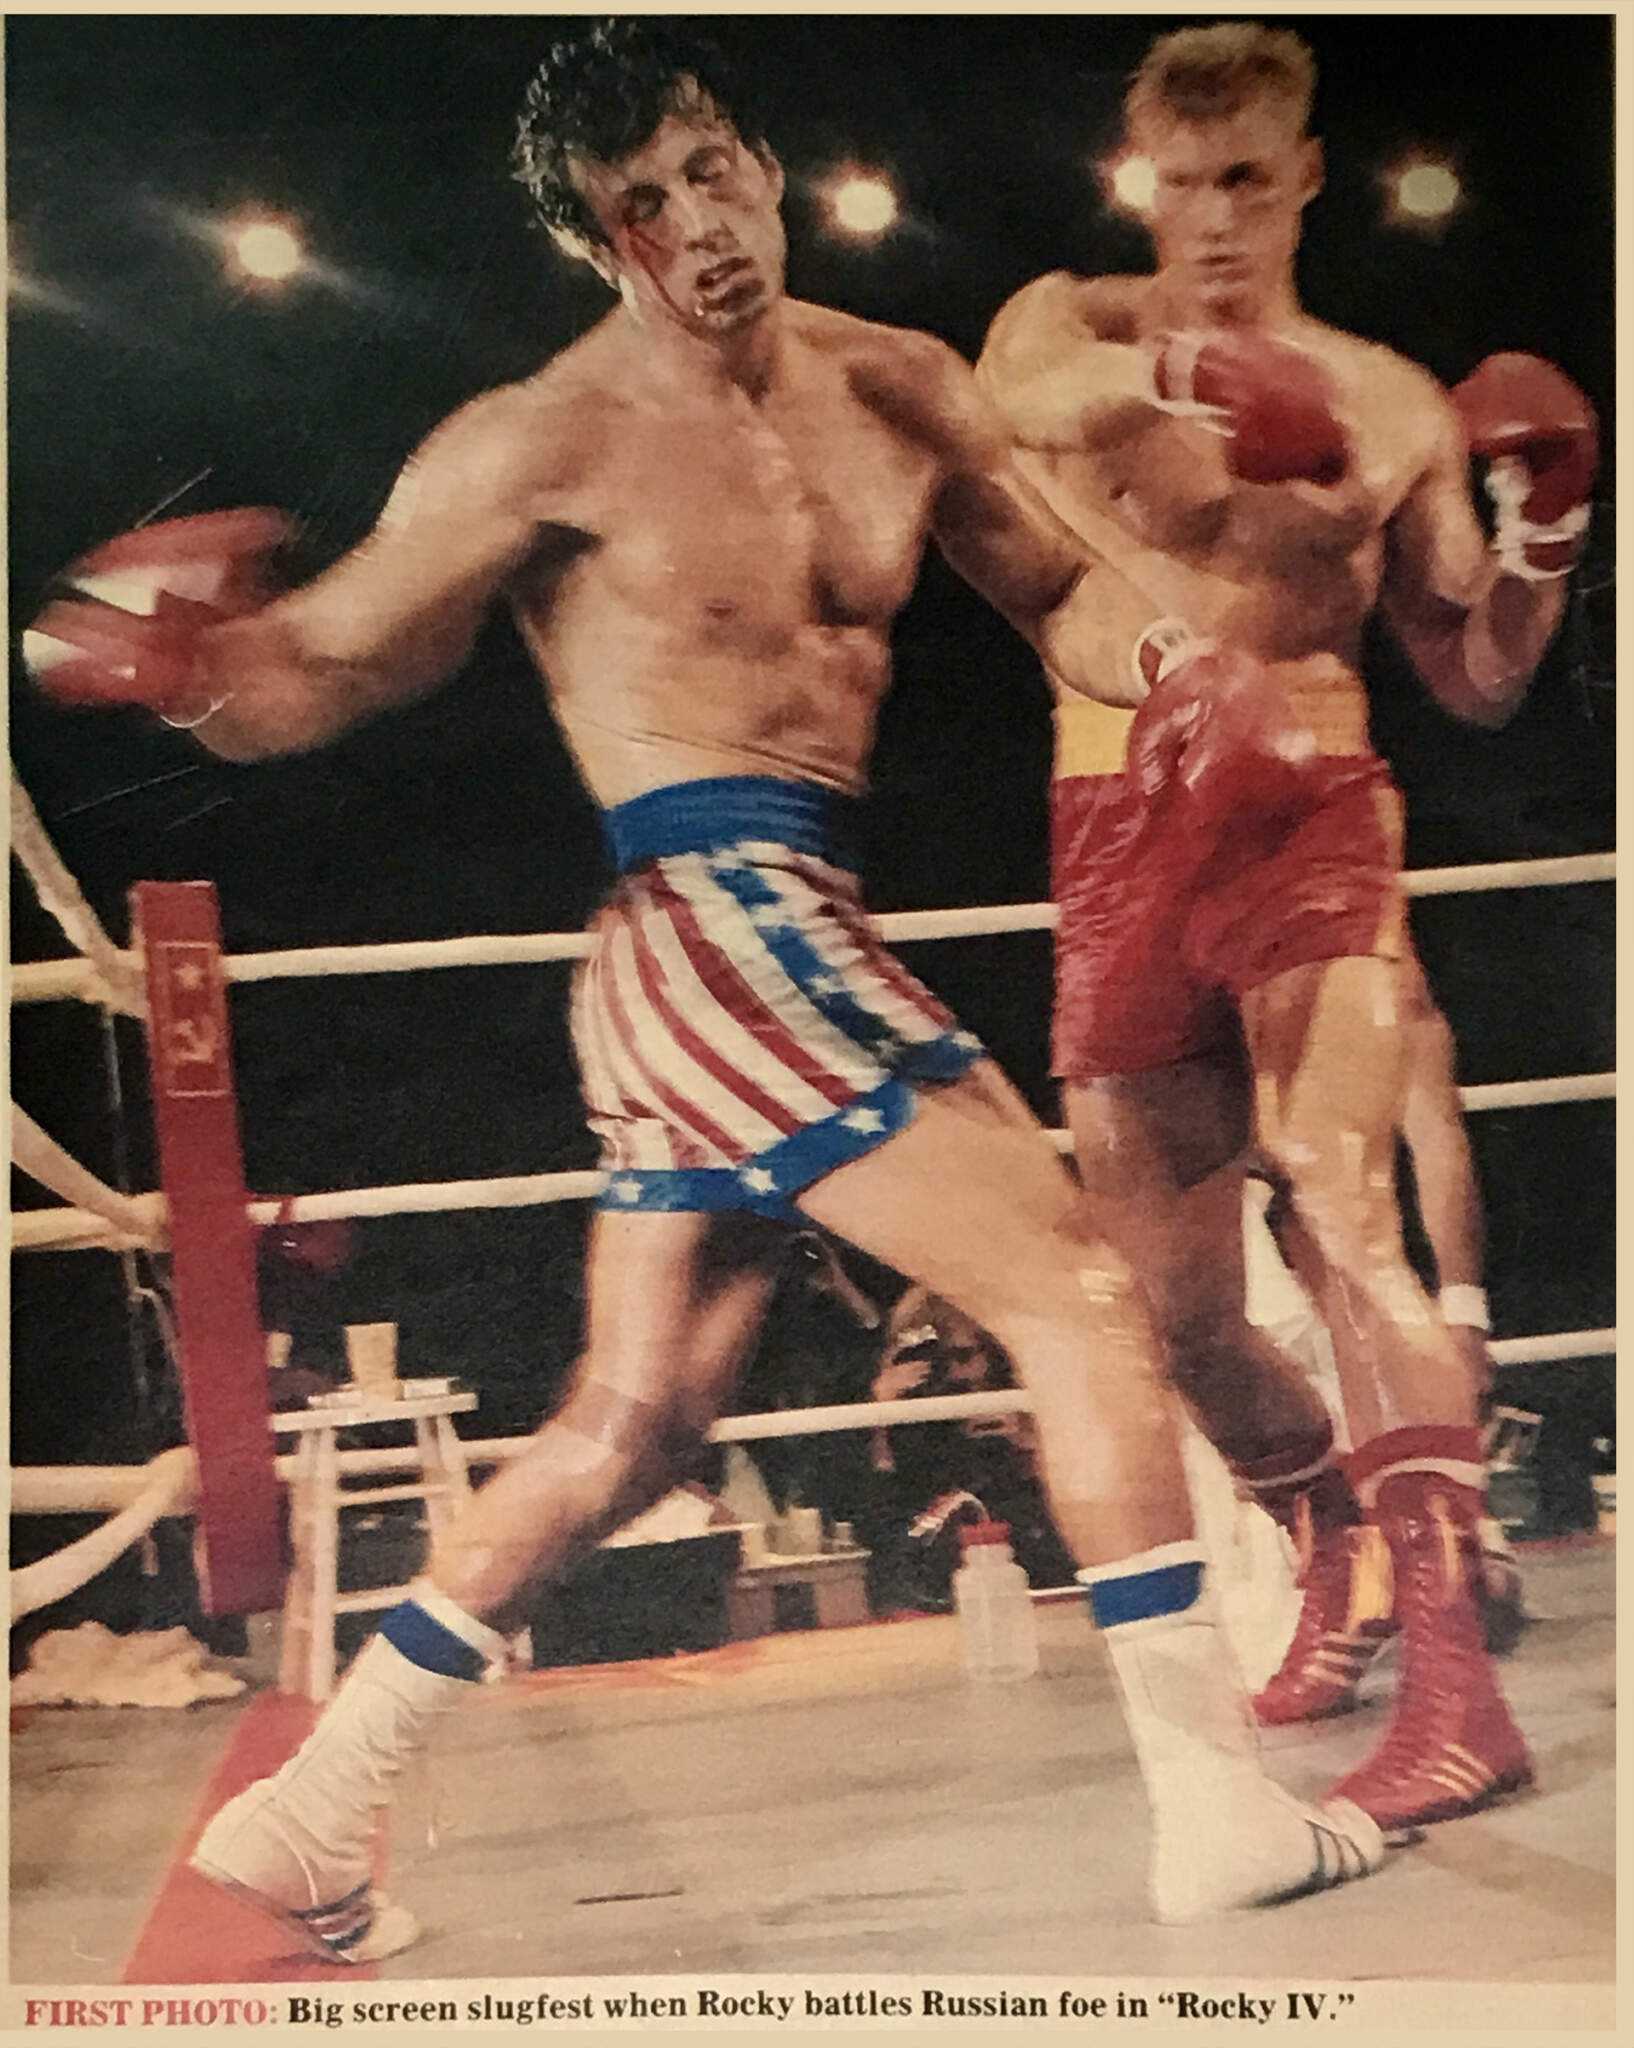 Dolph Lundgren in Rocky IV (1985) as pictured in the National Enquirer